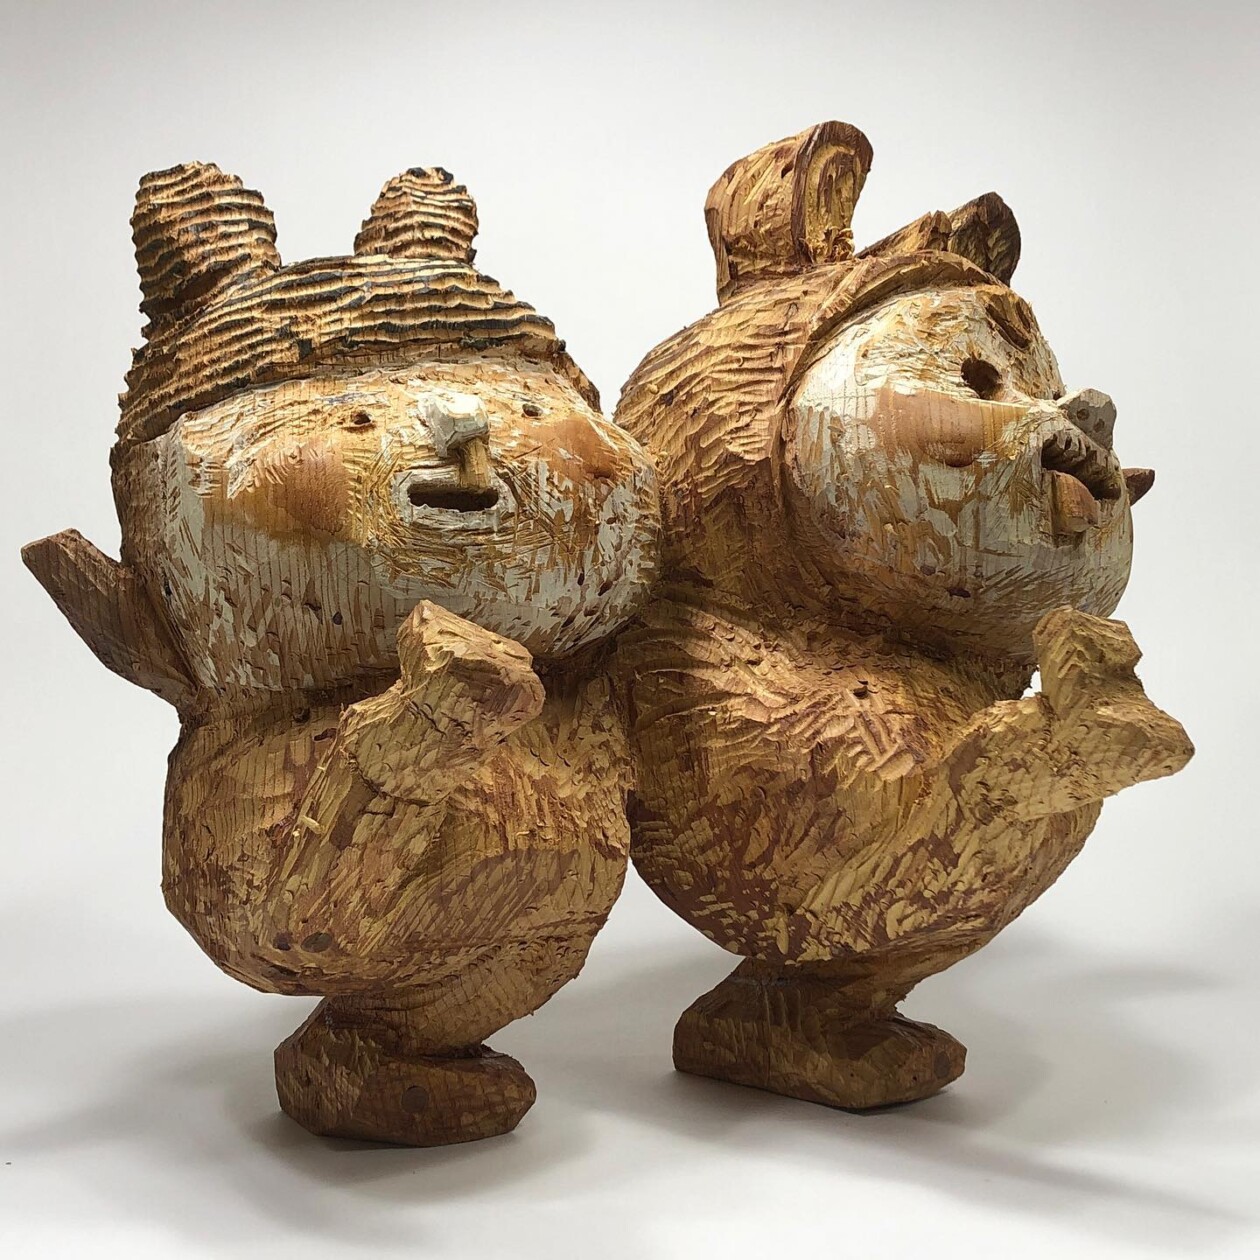 The Enchanting World Of Hirosuke Yabe's Wooden Beings (16)